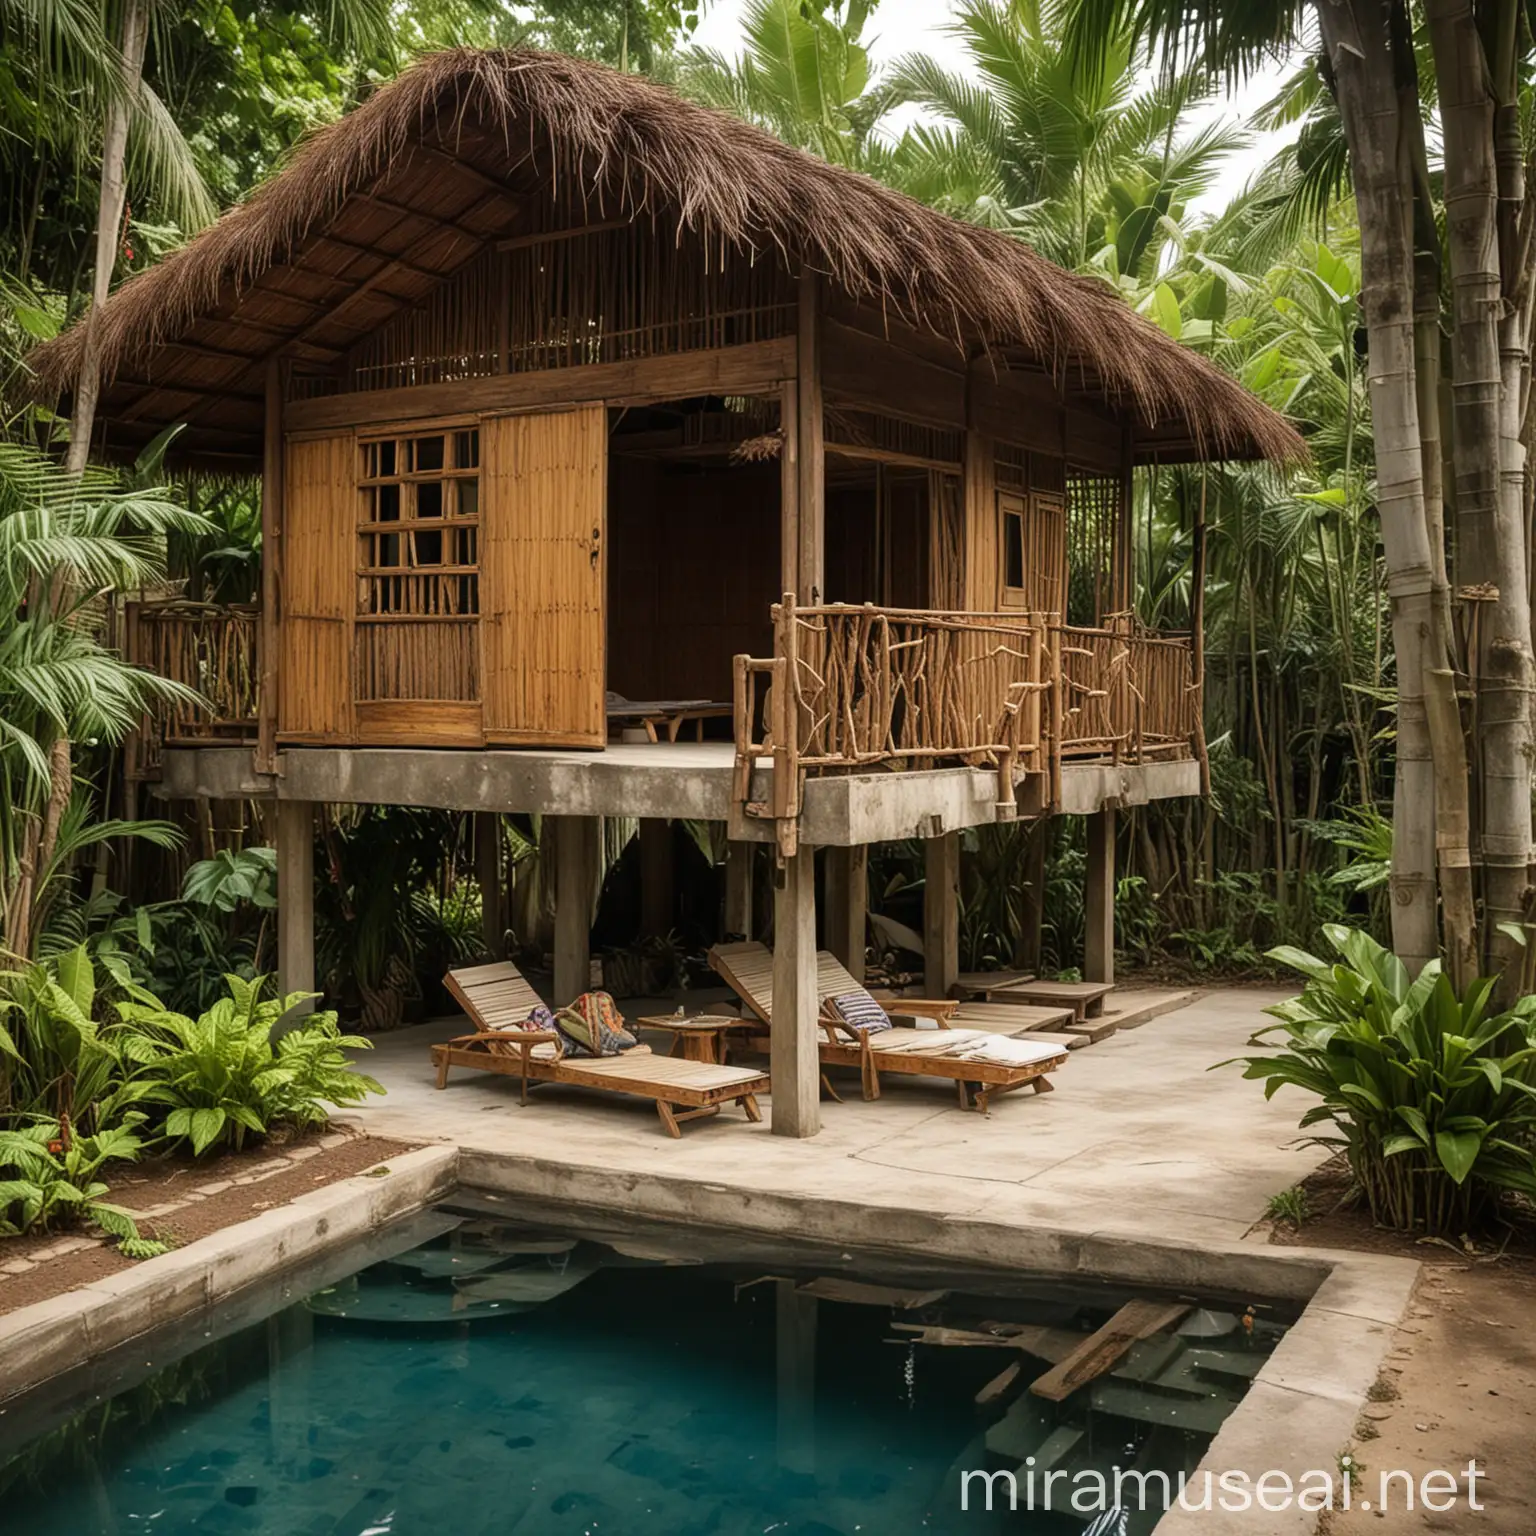 a two-level bahay kubo, with concrete posts, lumber and bamboo walls, native nipa roof. the first floor is an open area with sala and sofa. beside the bahay kubo is a small swimming pool and a garden.